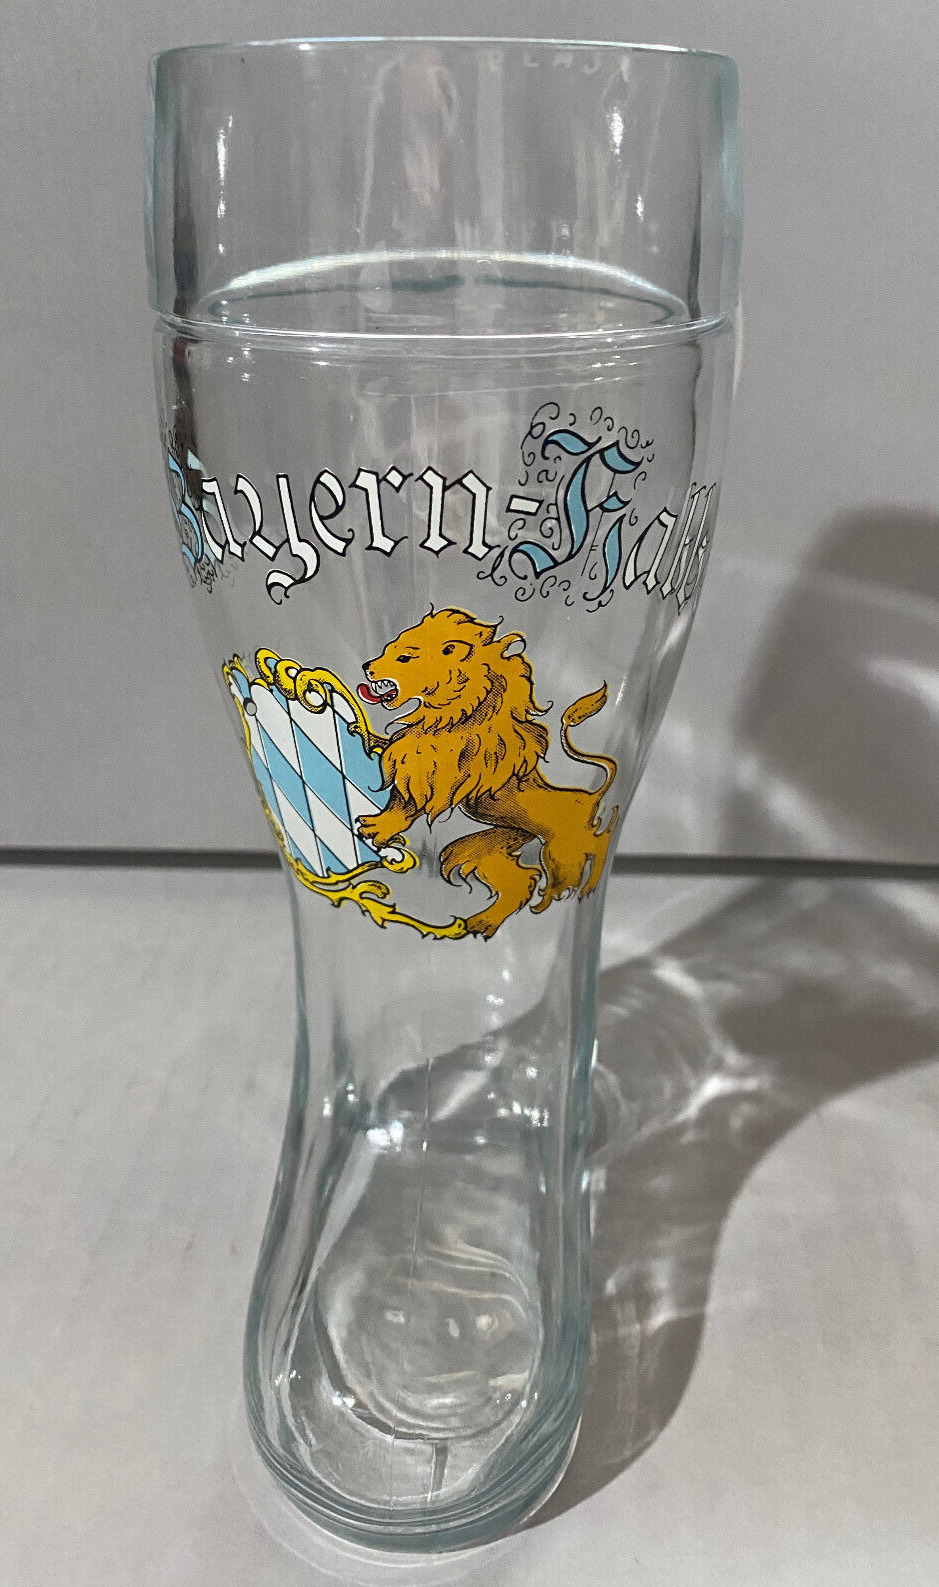 BAYERN (BAVARIA) GERMANY 0.5L BOOT-SHAPED BEER GLASS WITH COAT OF ARMS